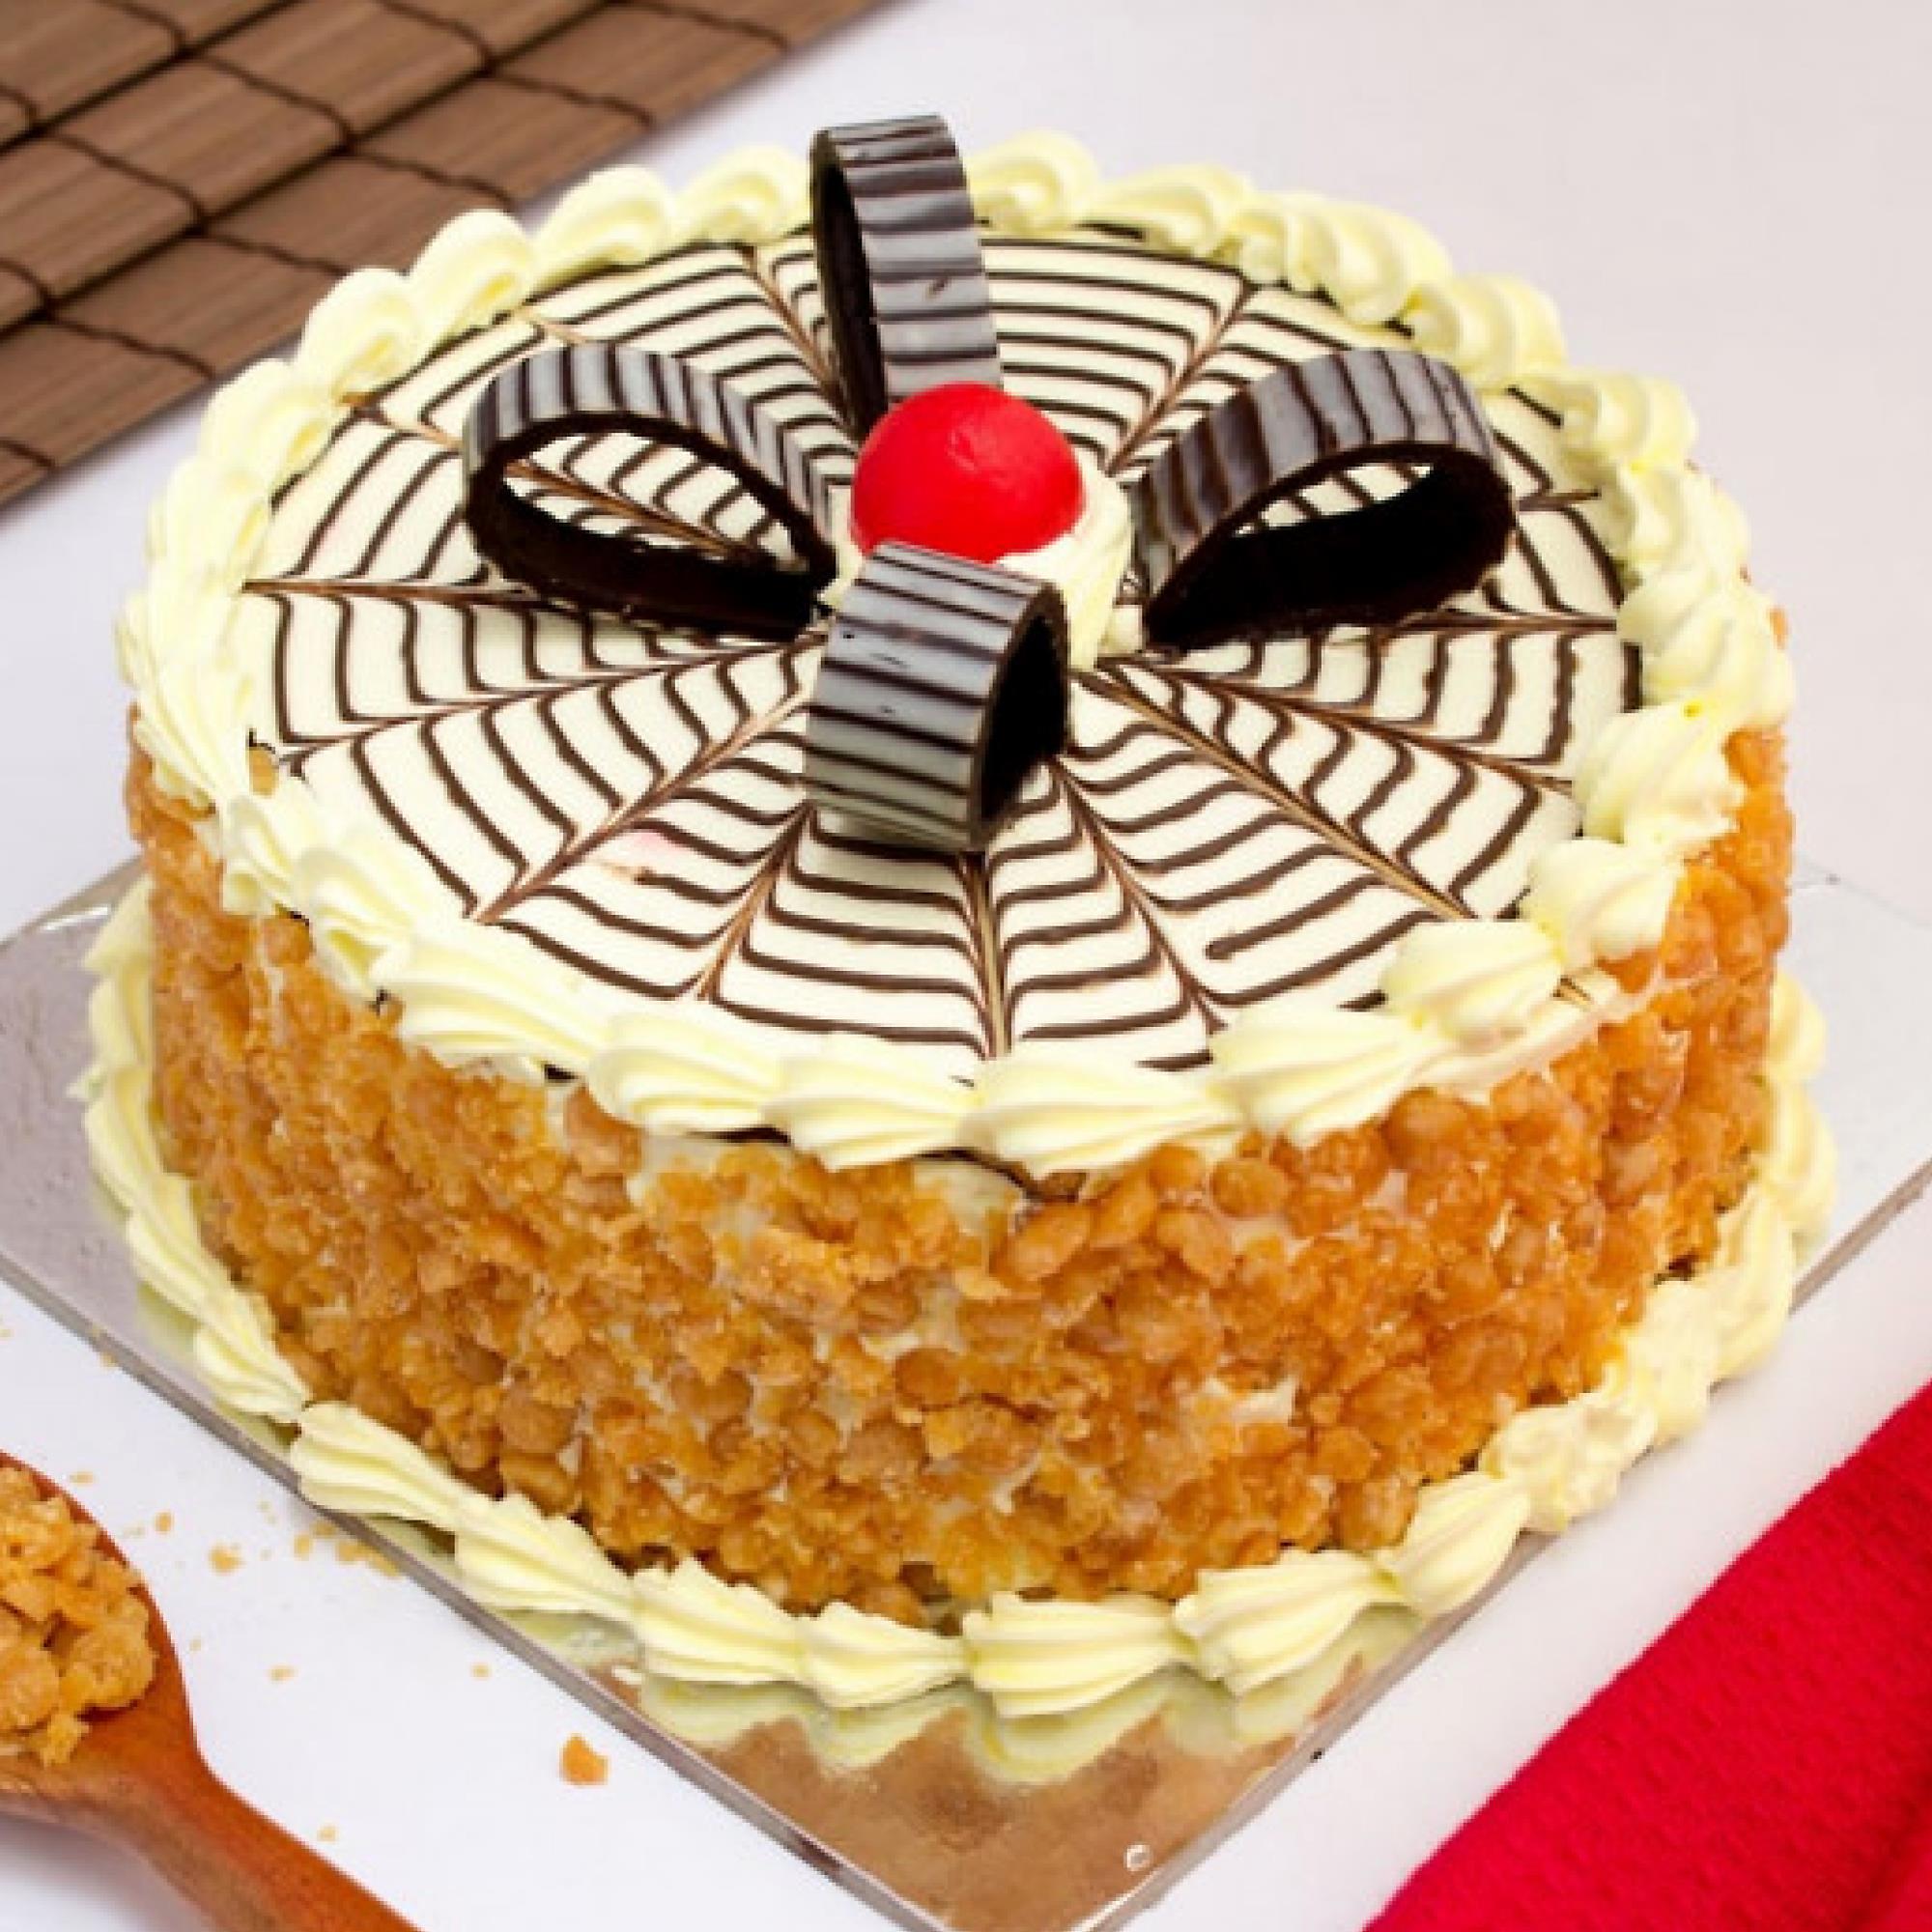 Details more than 73 cake zone bakery best - in.daotaonec